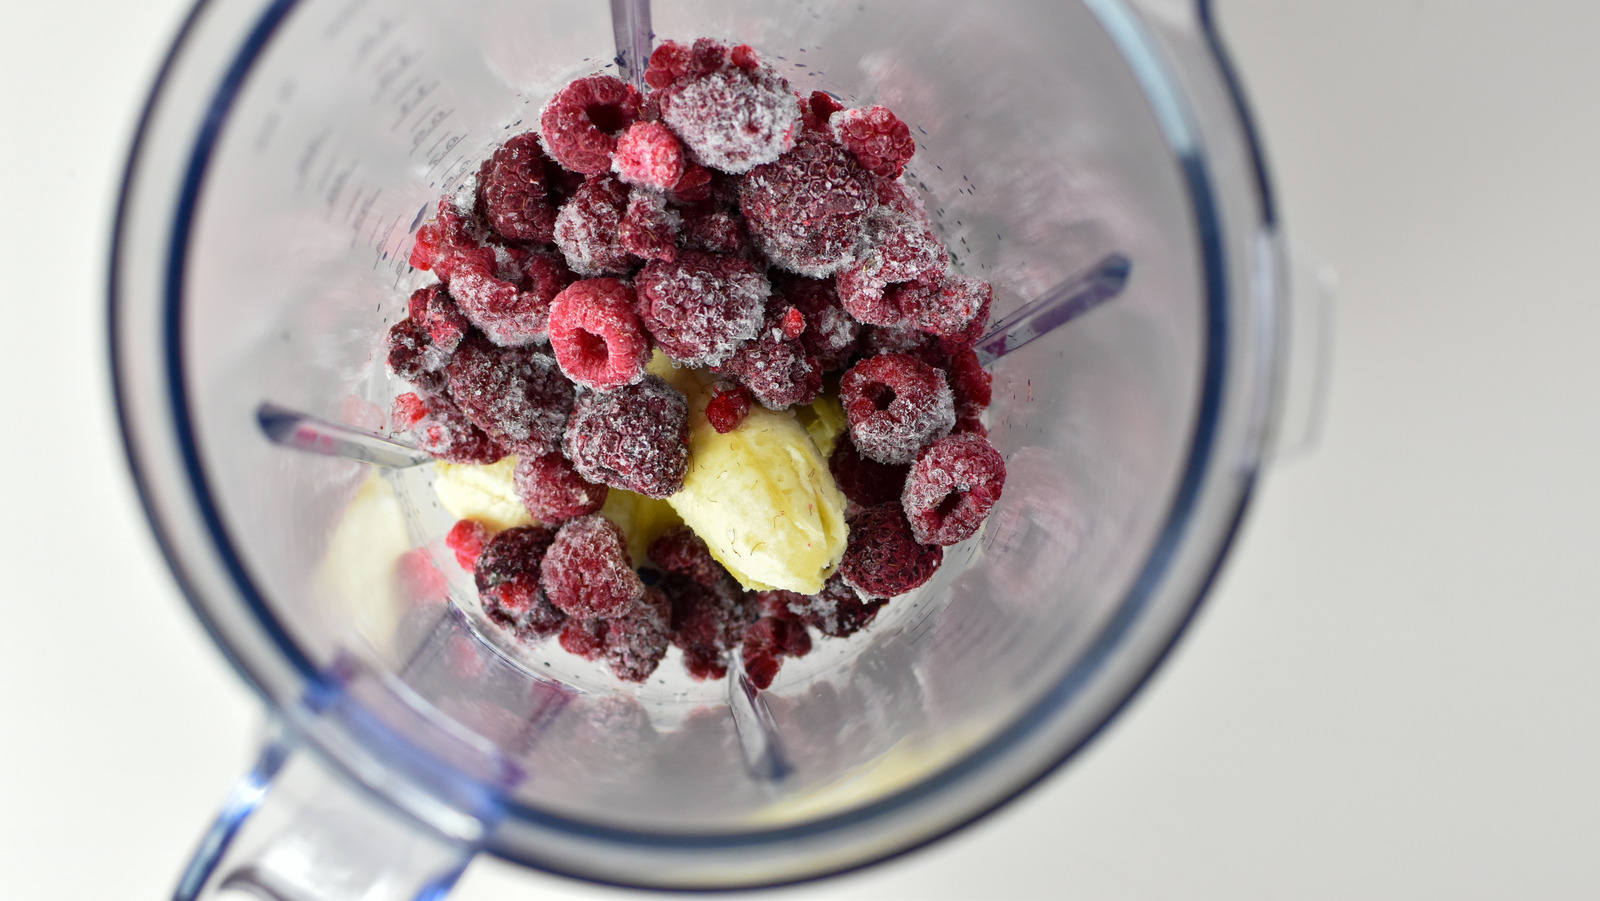 Why You Should Never Put Frozen Foods In The Blender